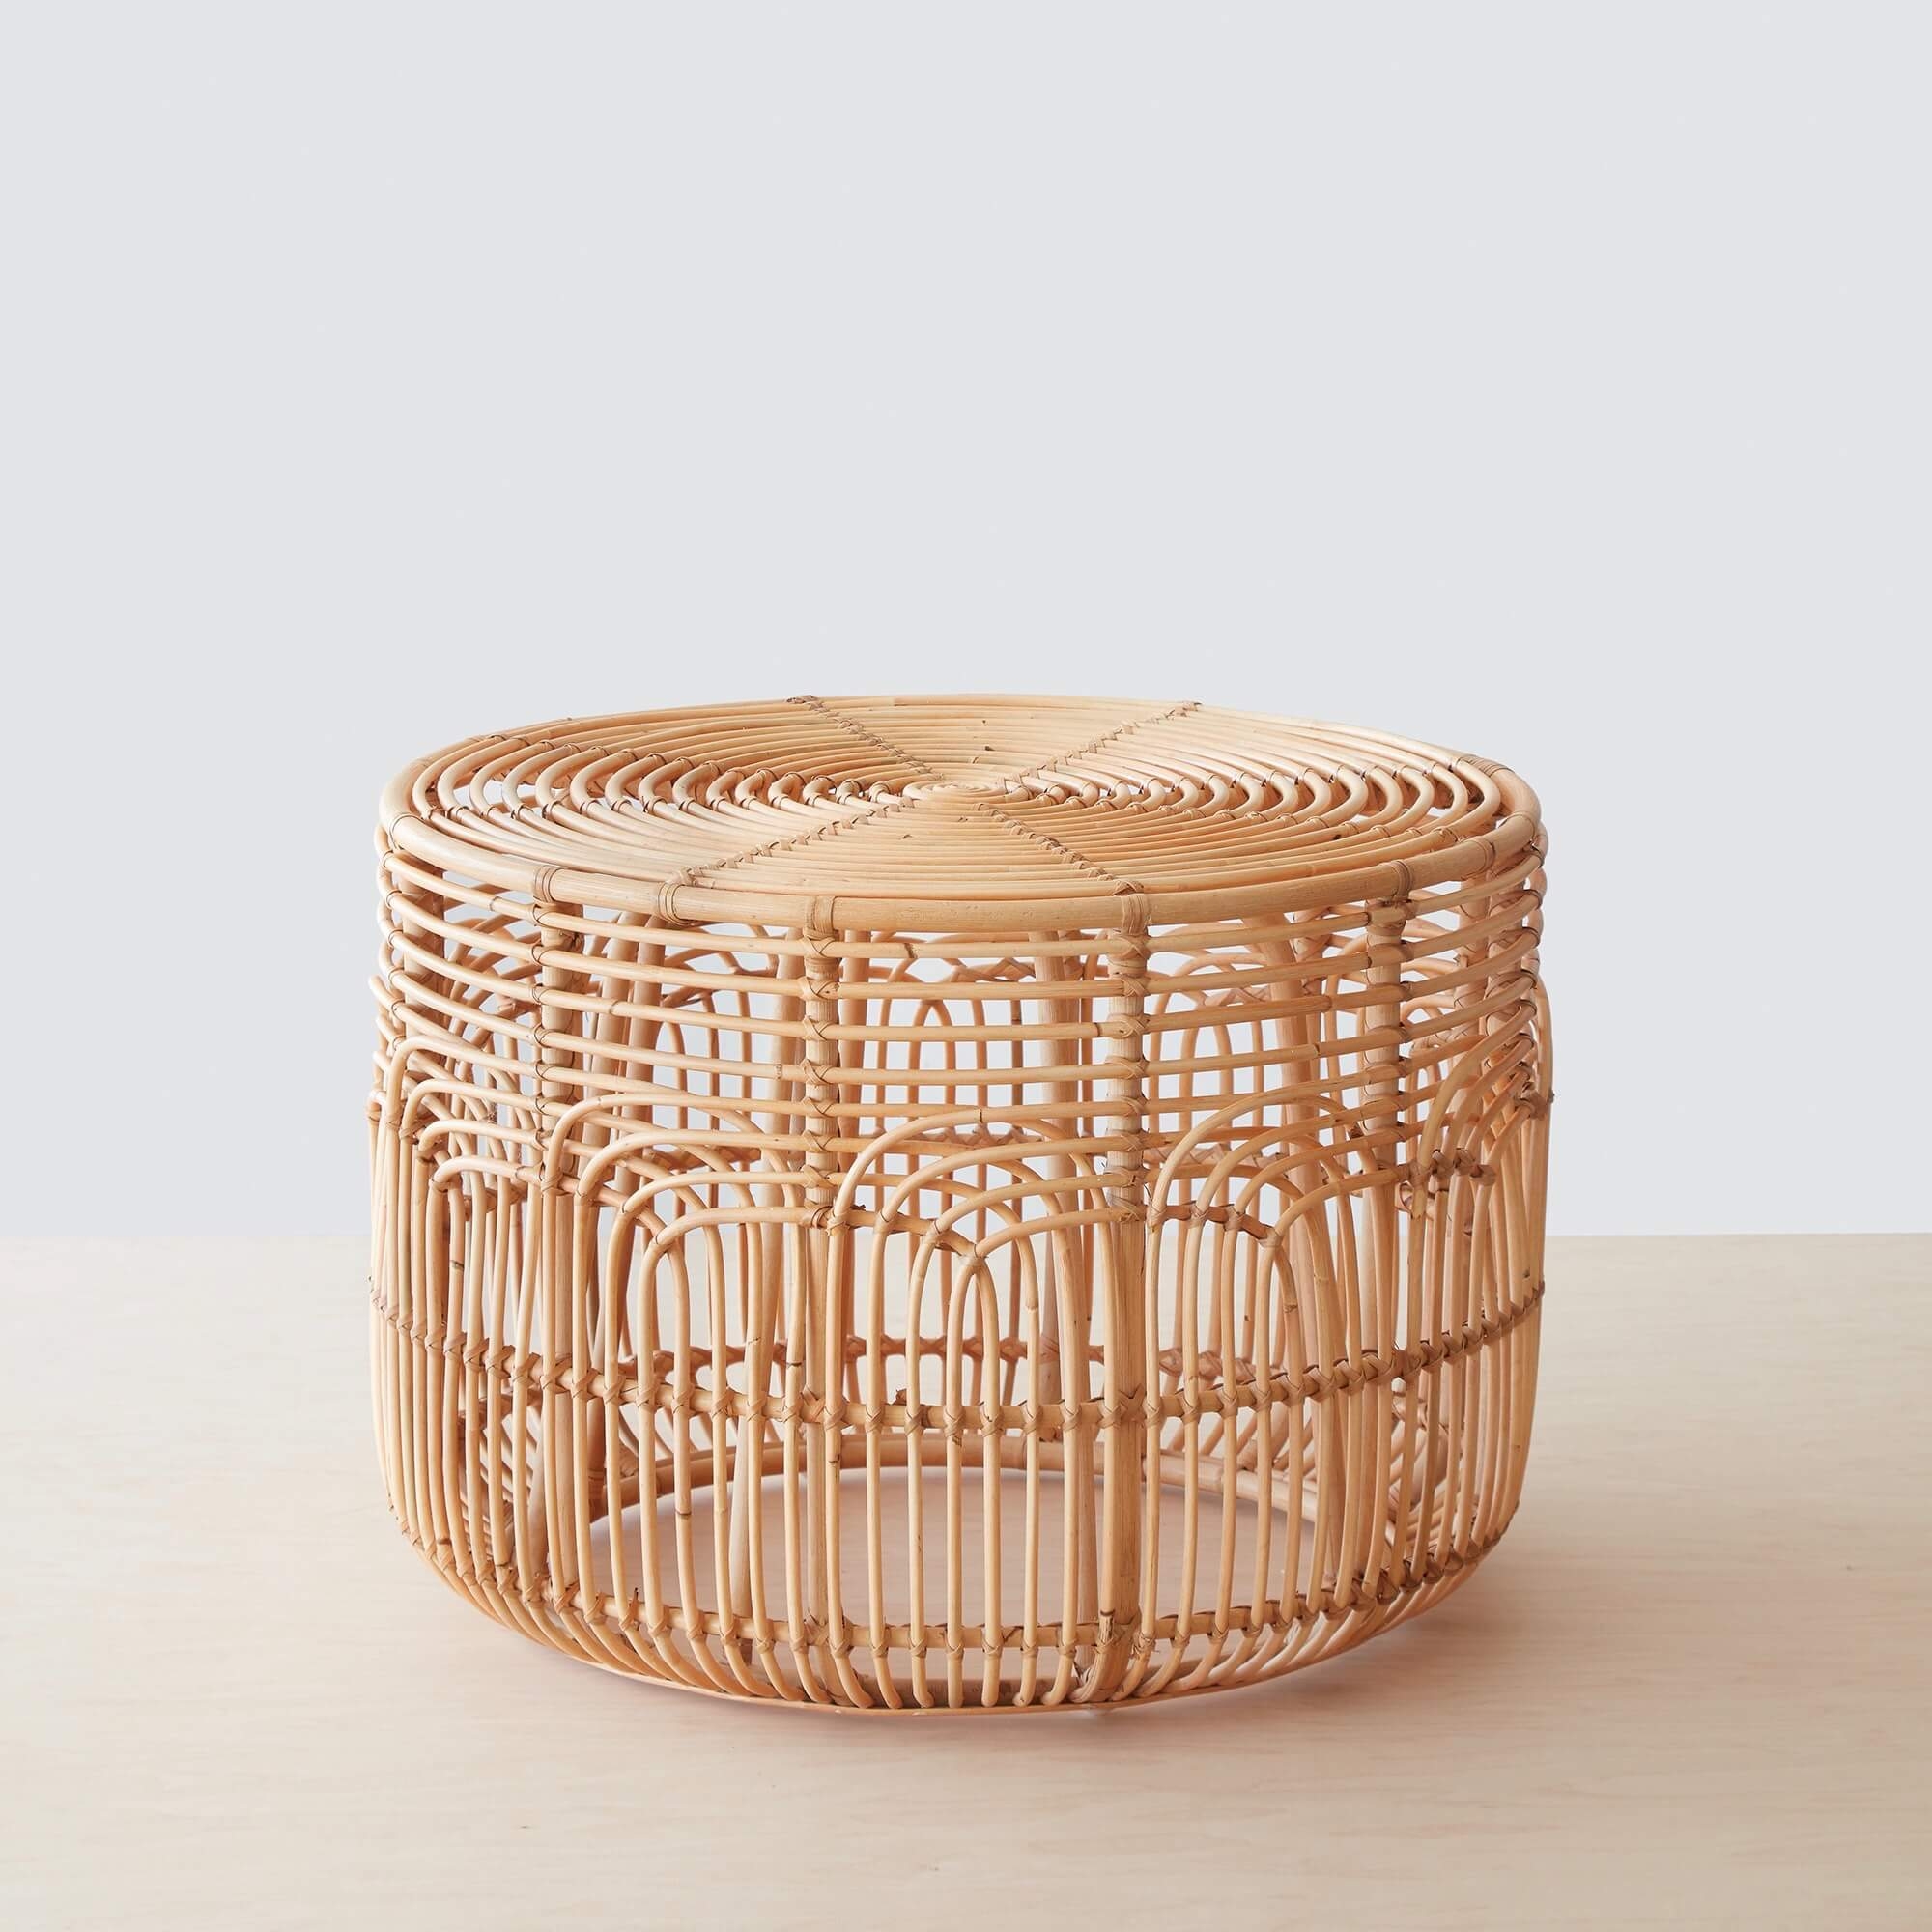 Naga Rattan Side Table By The Citizenry - Image 0